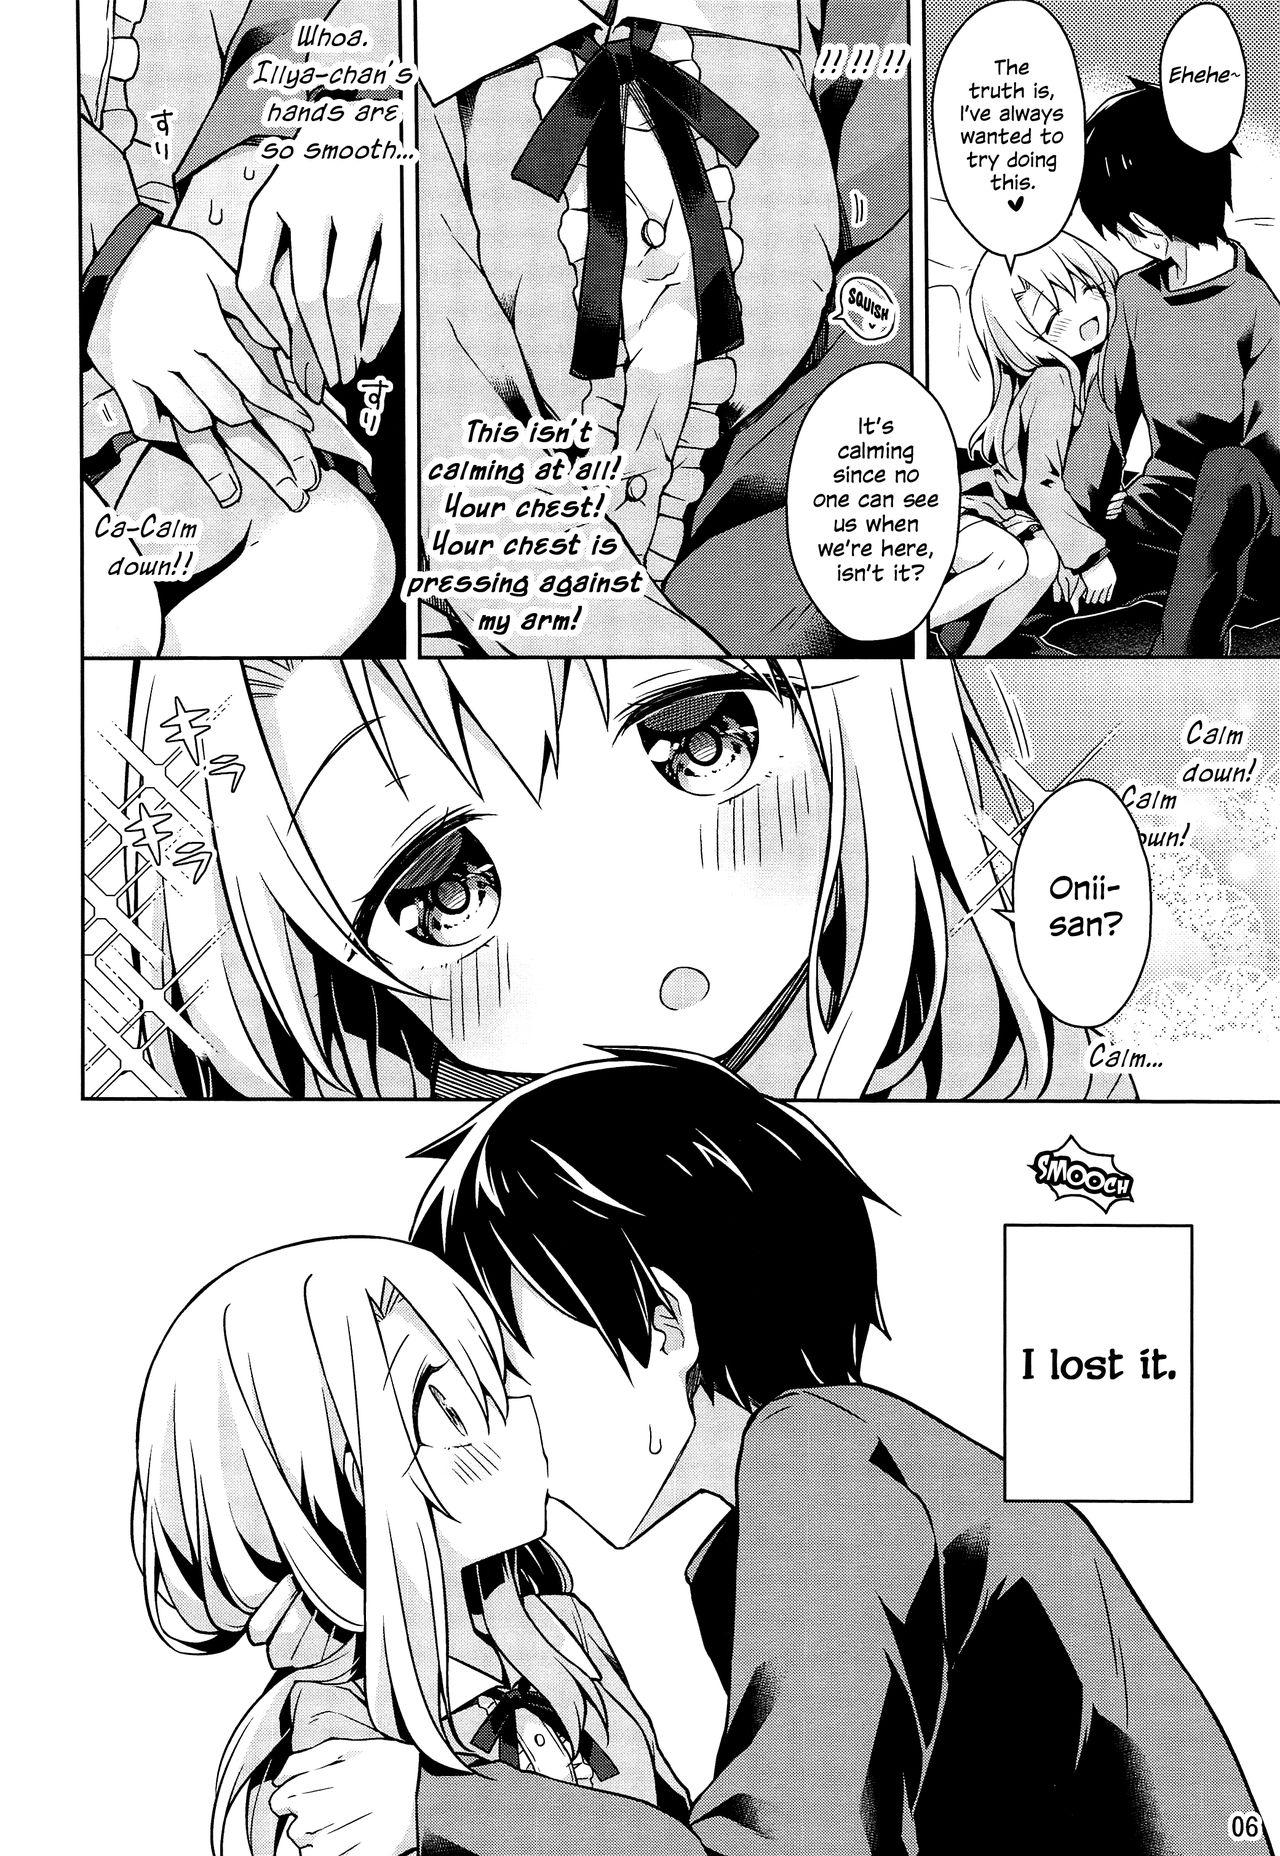 Hole Illya to Ouchi de Ecchi Shitai!! | I Want To Make Love With Illya At My Place!! - Fate kaleid liner prisma illya Oral Sex - Page 7